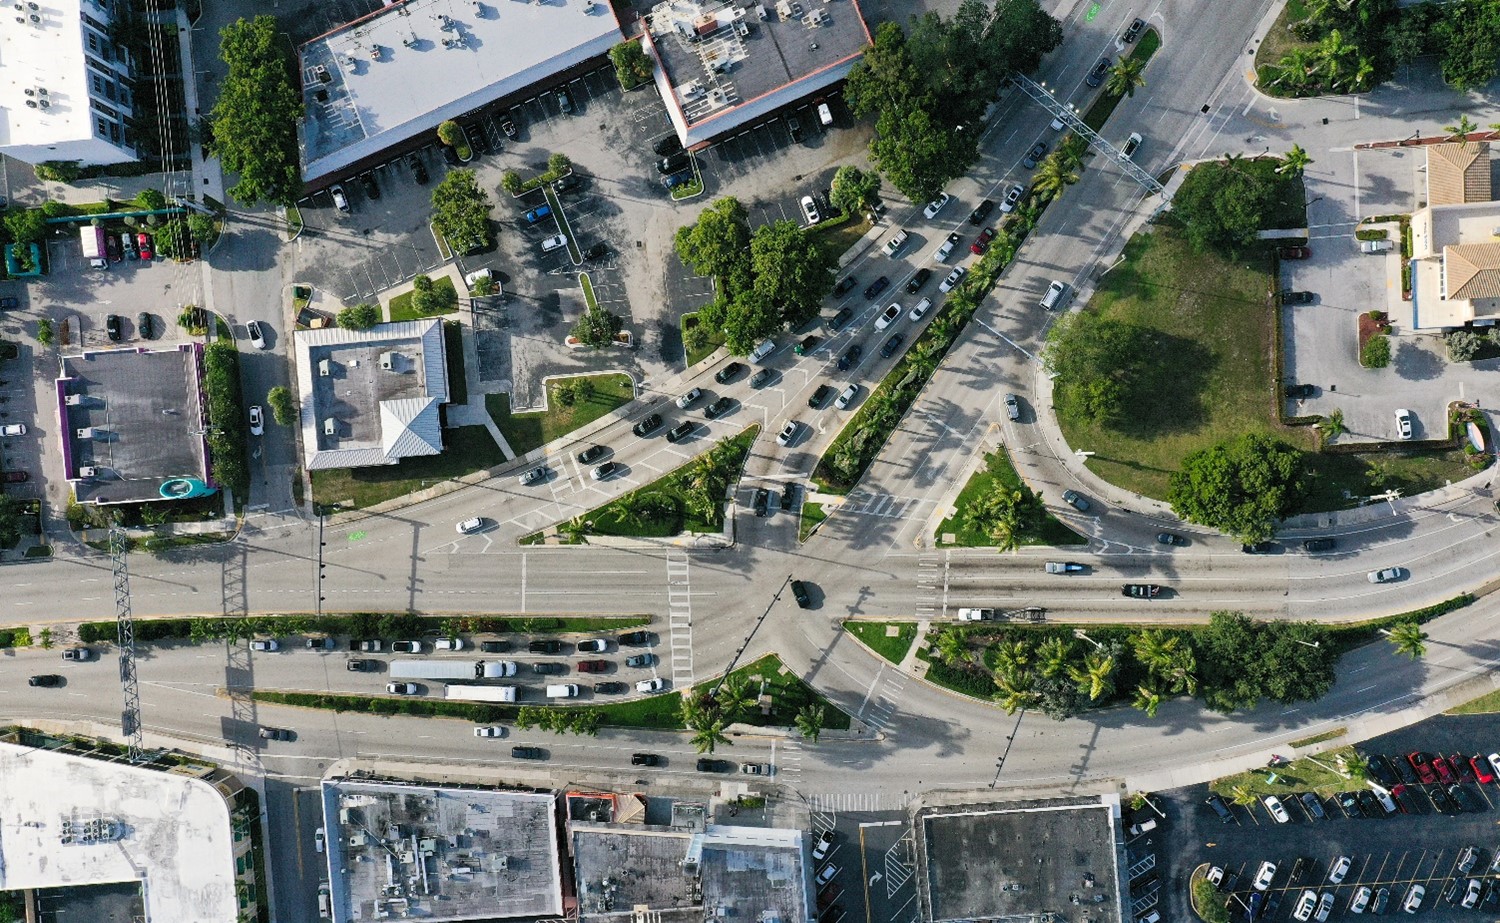 Overall SR 5/US 1 and SR 838/Sunrise Boulevard Intersection Aerial View